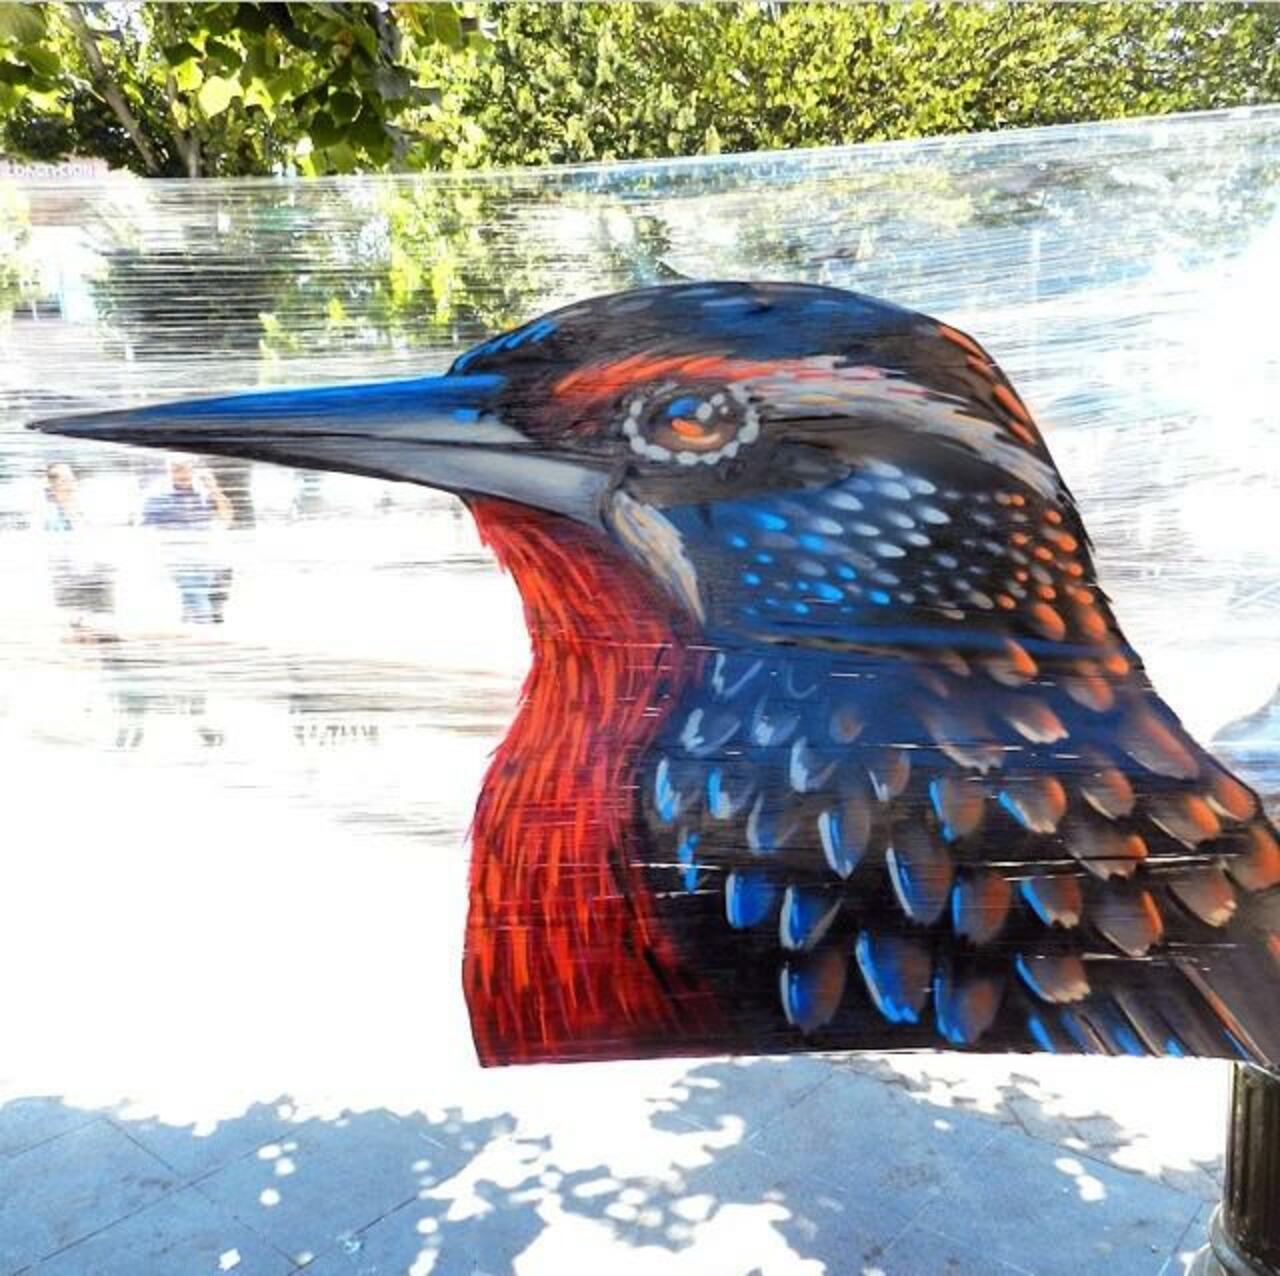 Nature in Street Art on stretched cling-film by Ren Graffiti  

#art #graffiti #mural #streetart http://t.co/Y8ae131QlO